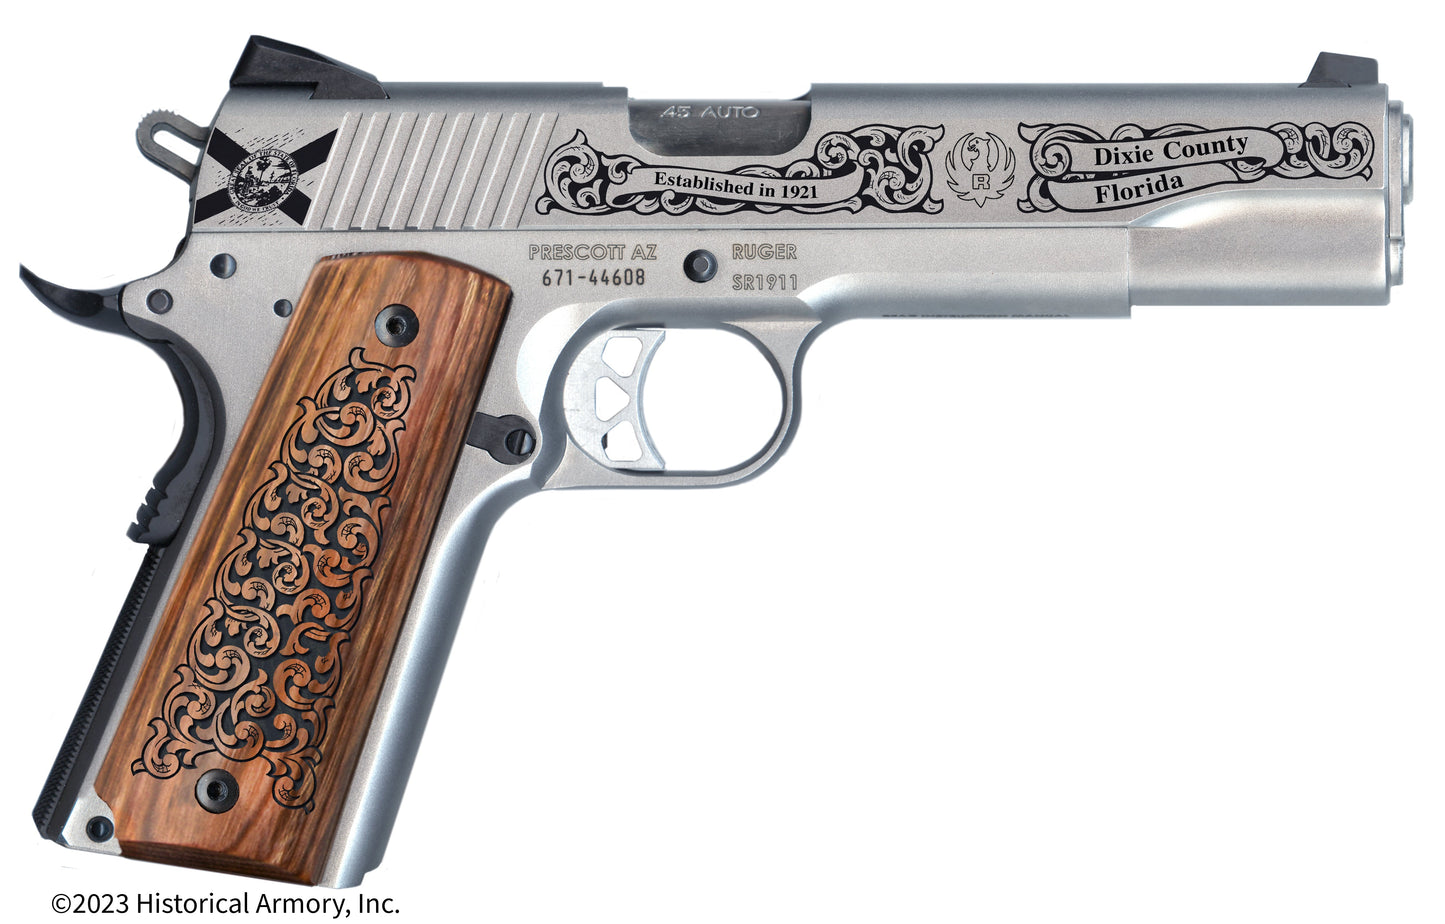 Dixie County Florida Engraved .45 Auto Ruger 1911